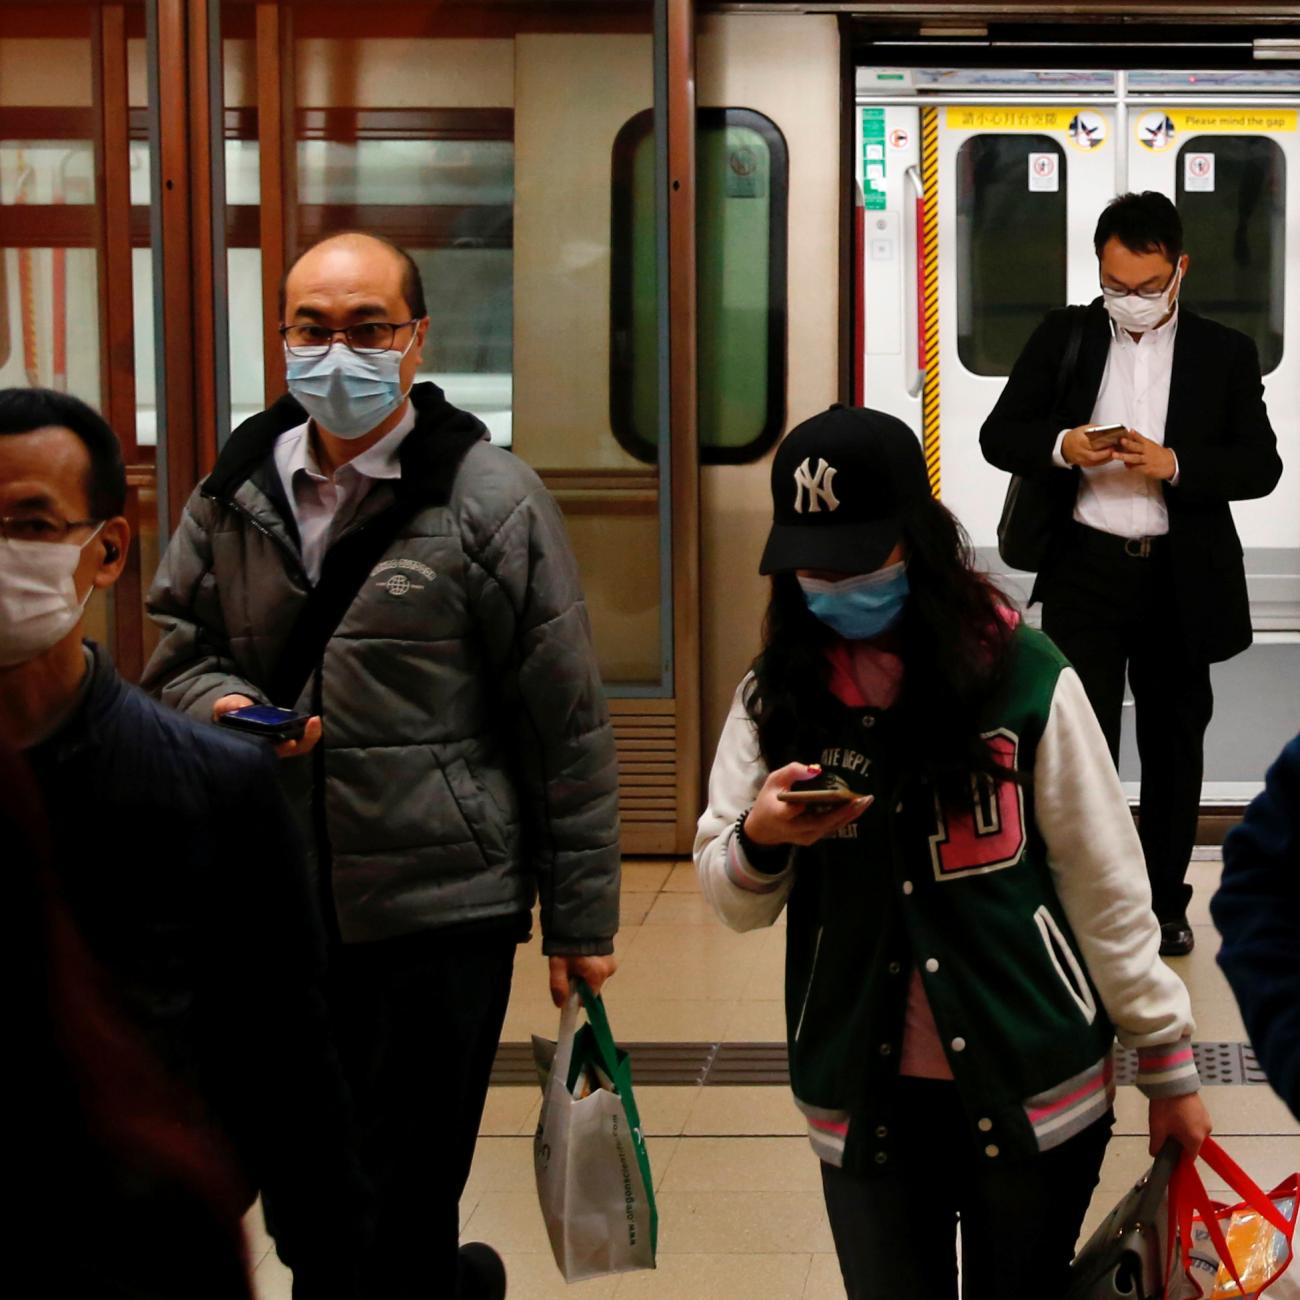 People wear protective masks following the outbreak of a new coronavirus, during their morning commute in a station, in Hong Kong, China